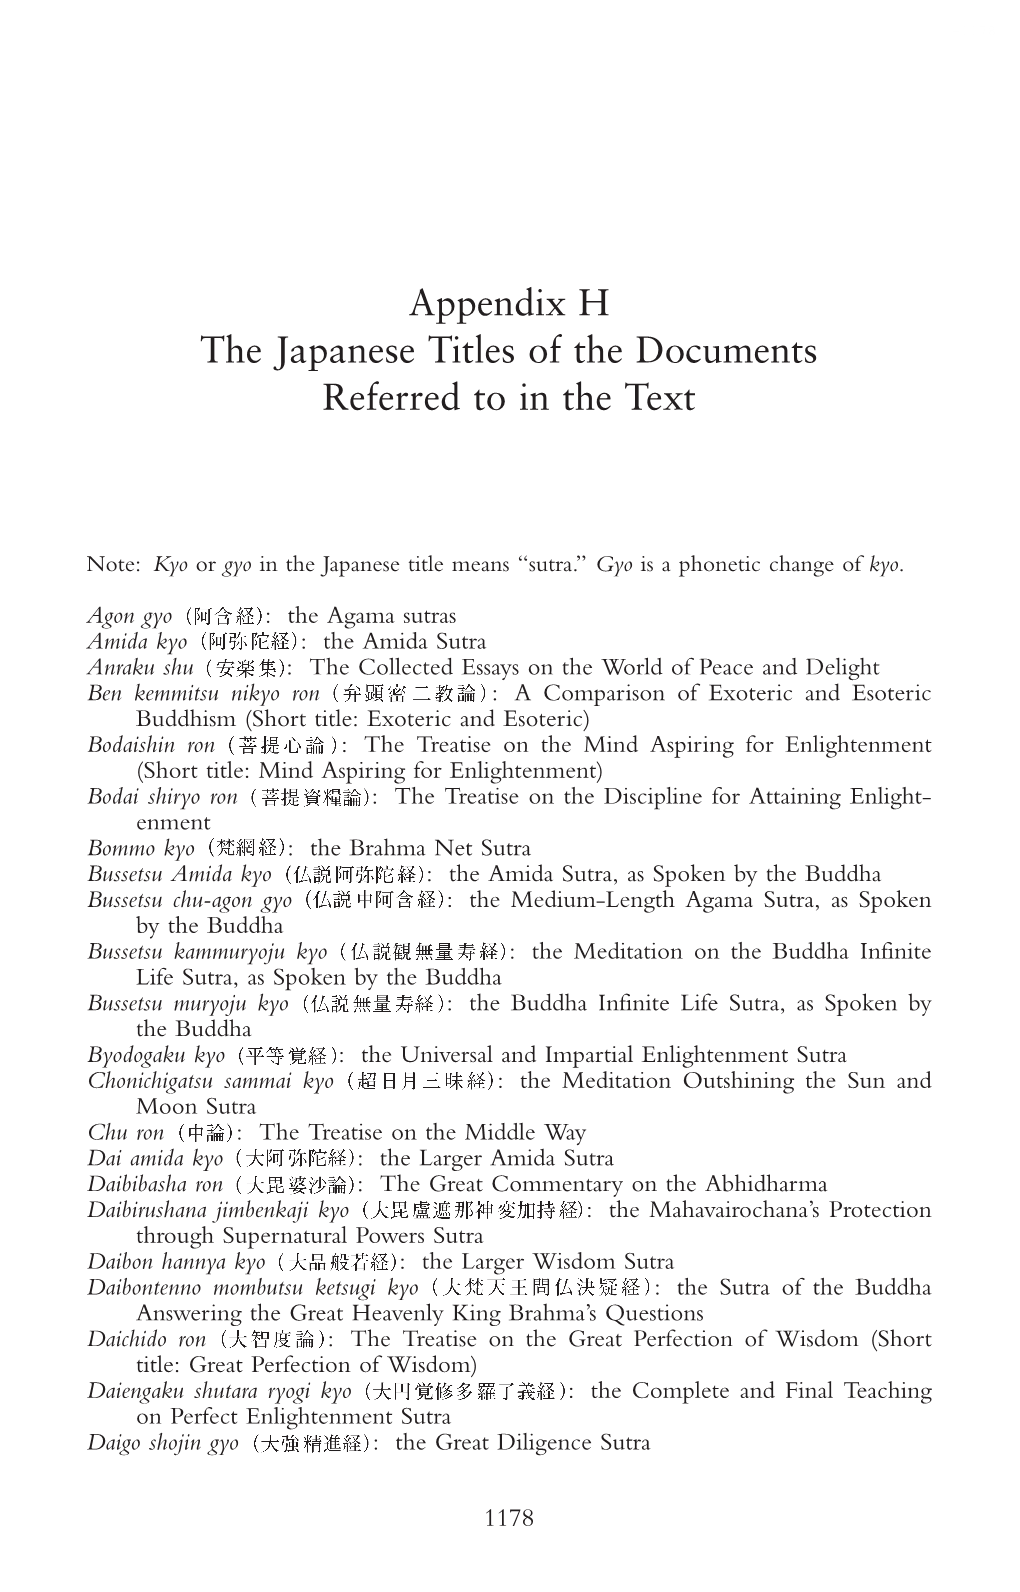 Appendix H the Japanese Titles of the Documents Referred to in the Text